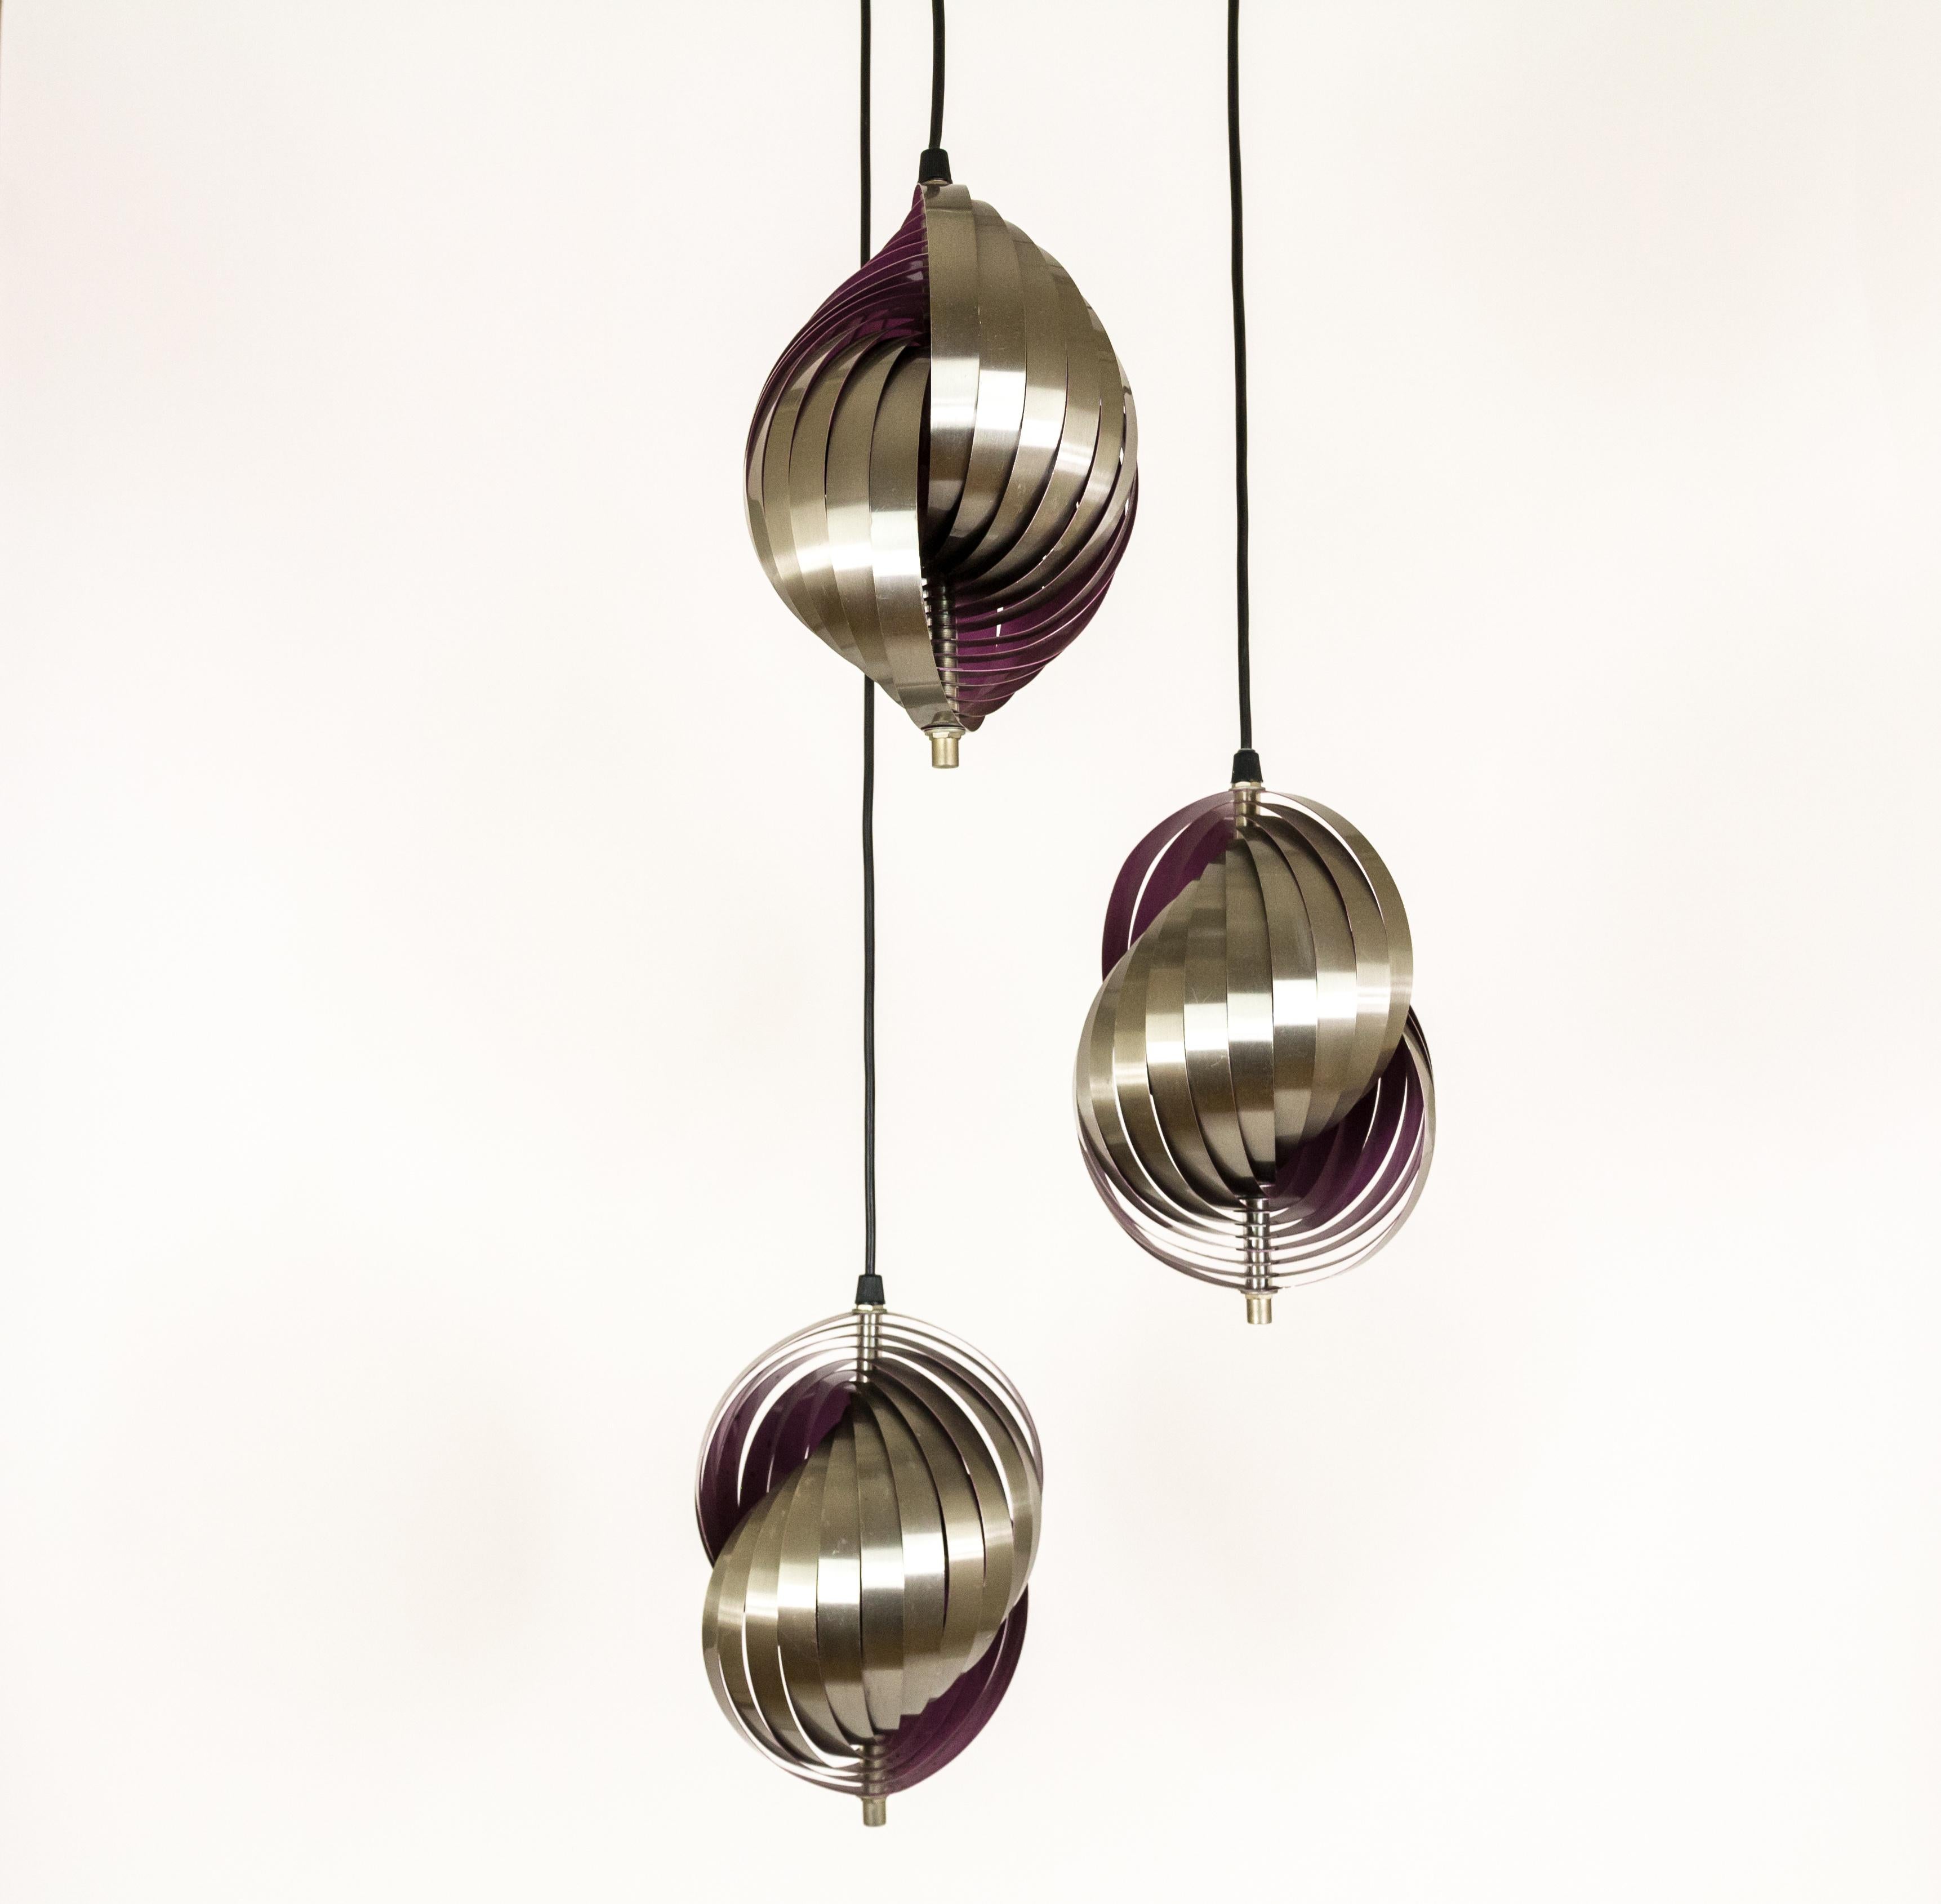 Henri Mathieu designed this highly original fixture, circa 1970. It consists of three hanging pendants. Each pendant is approximately 19 cm / 7.5 inches in diameter and 26 cm / 10 inches high. The three elements can be hung at different